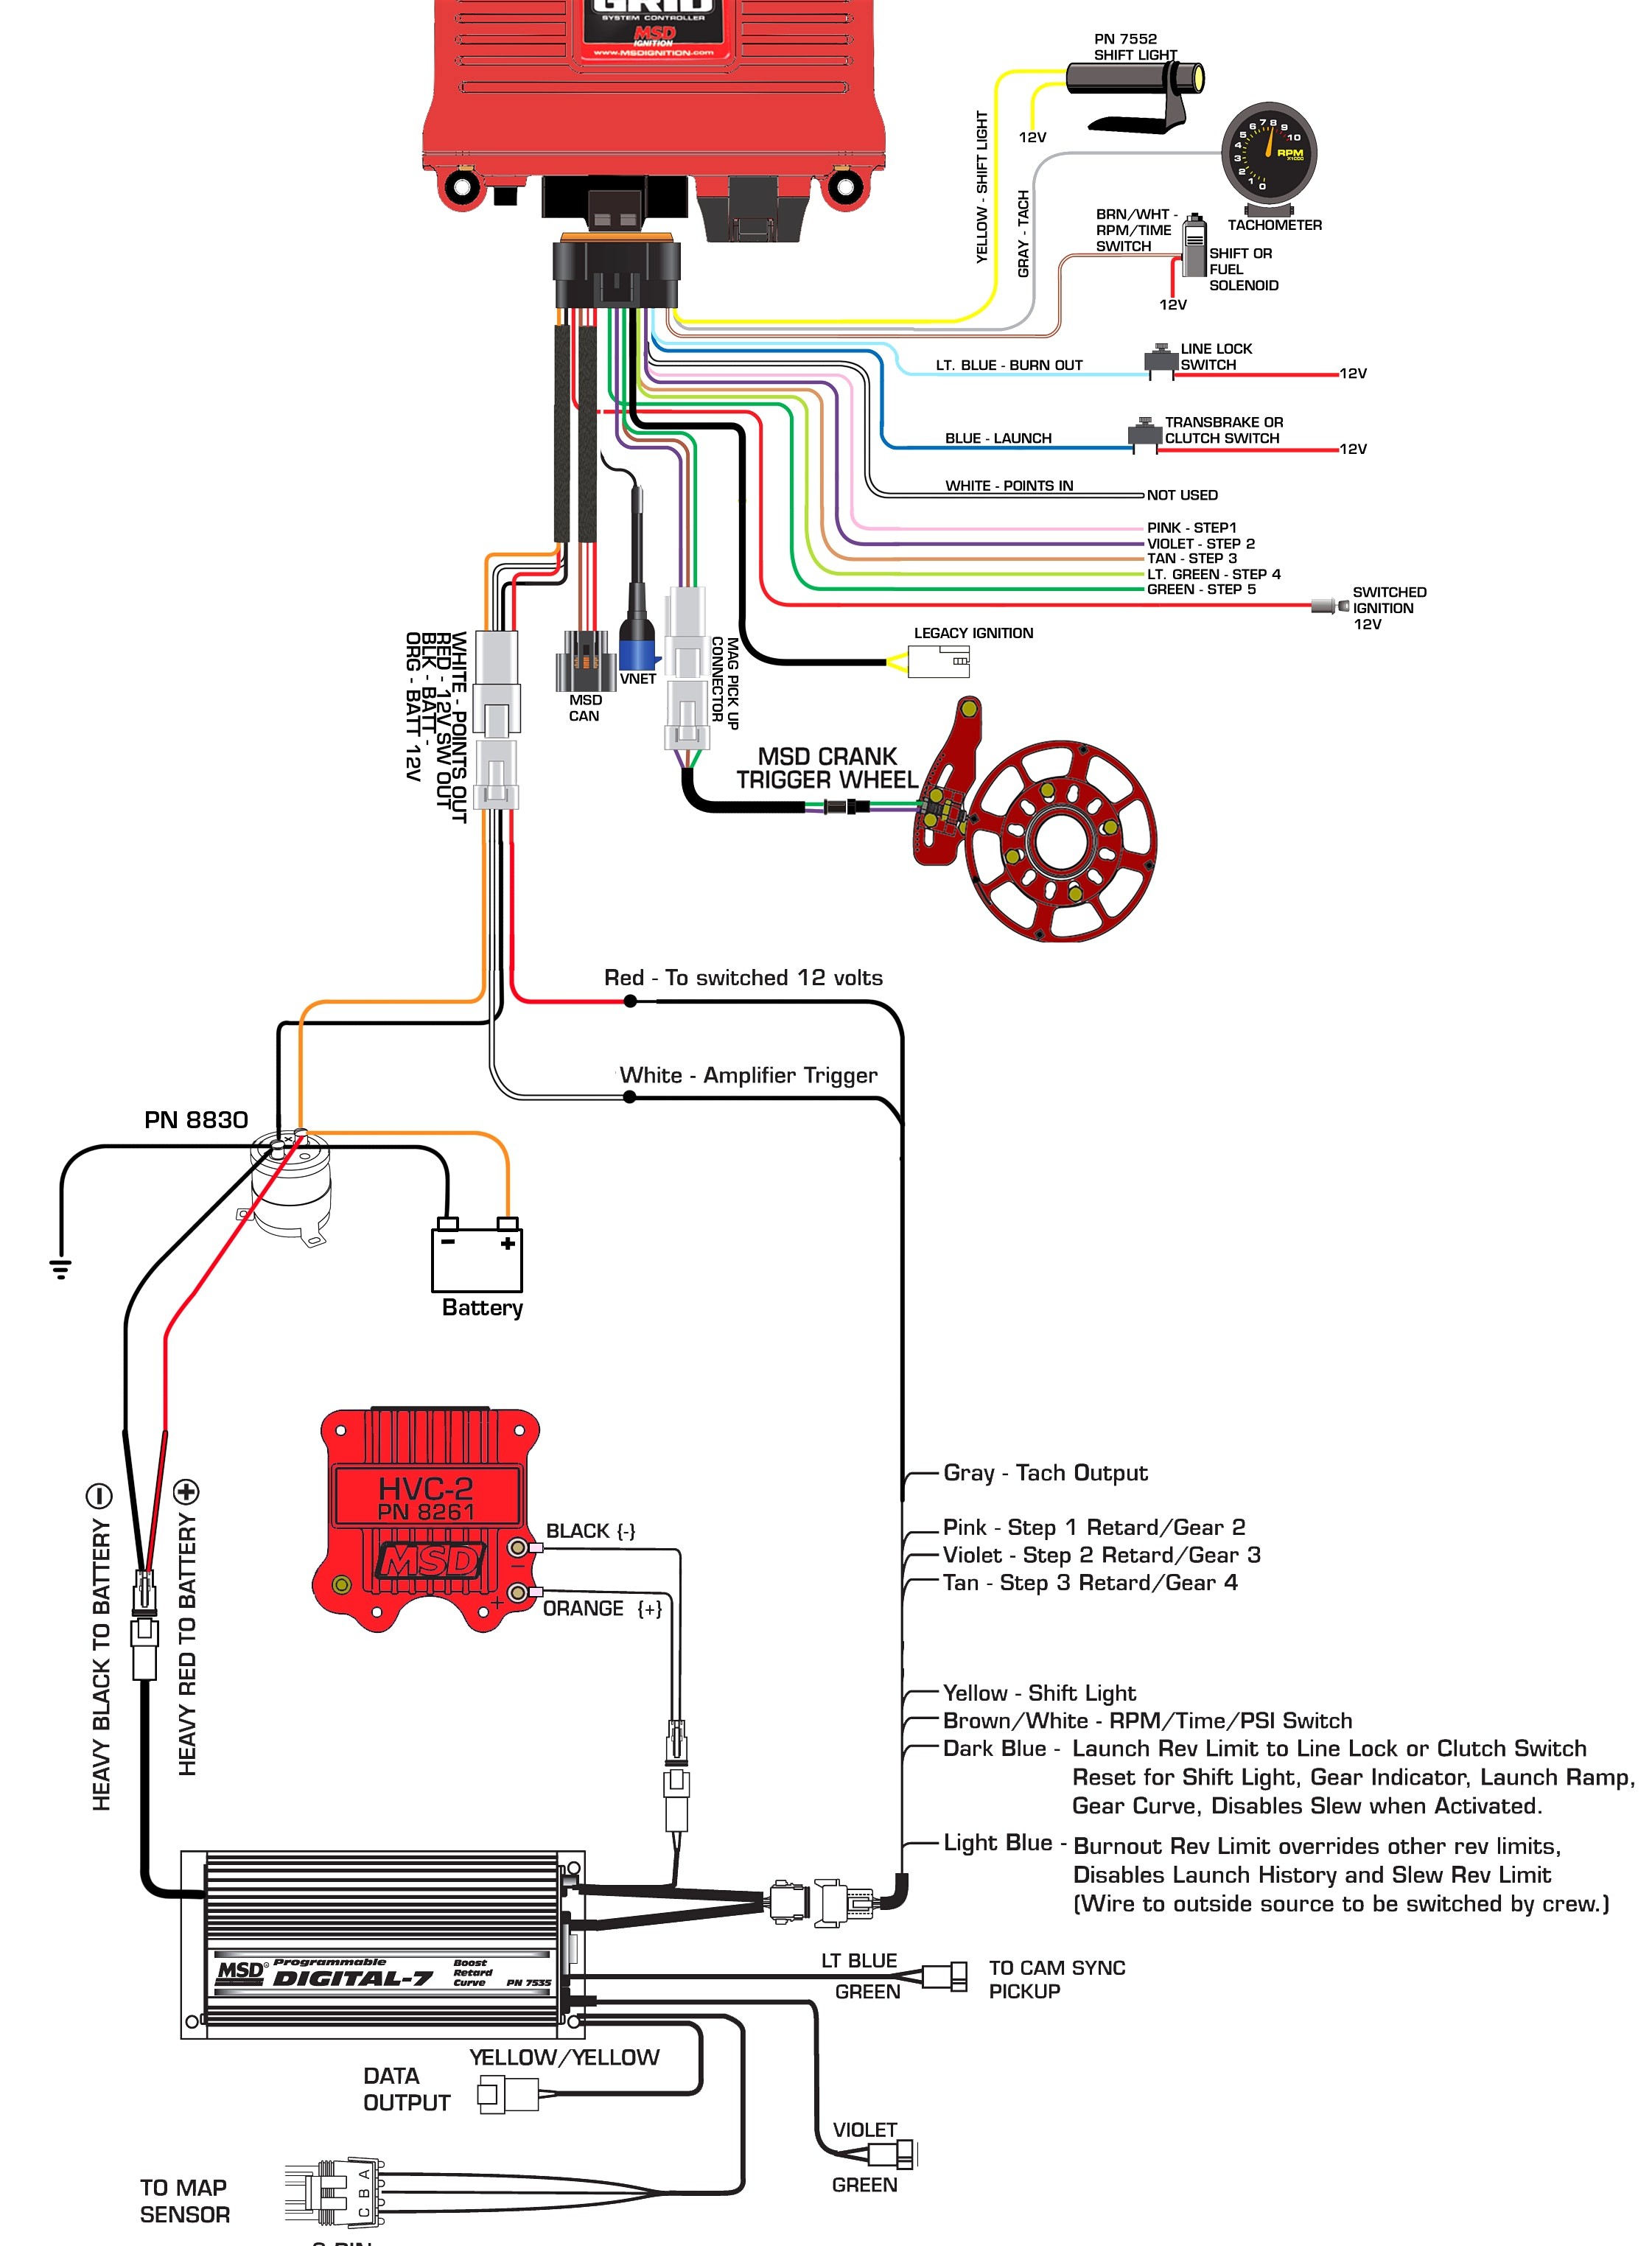 Accel Hei Distributor Wiring Diagram Fitfathers Me Fair